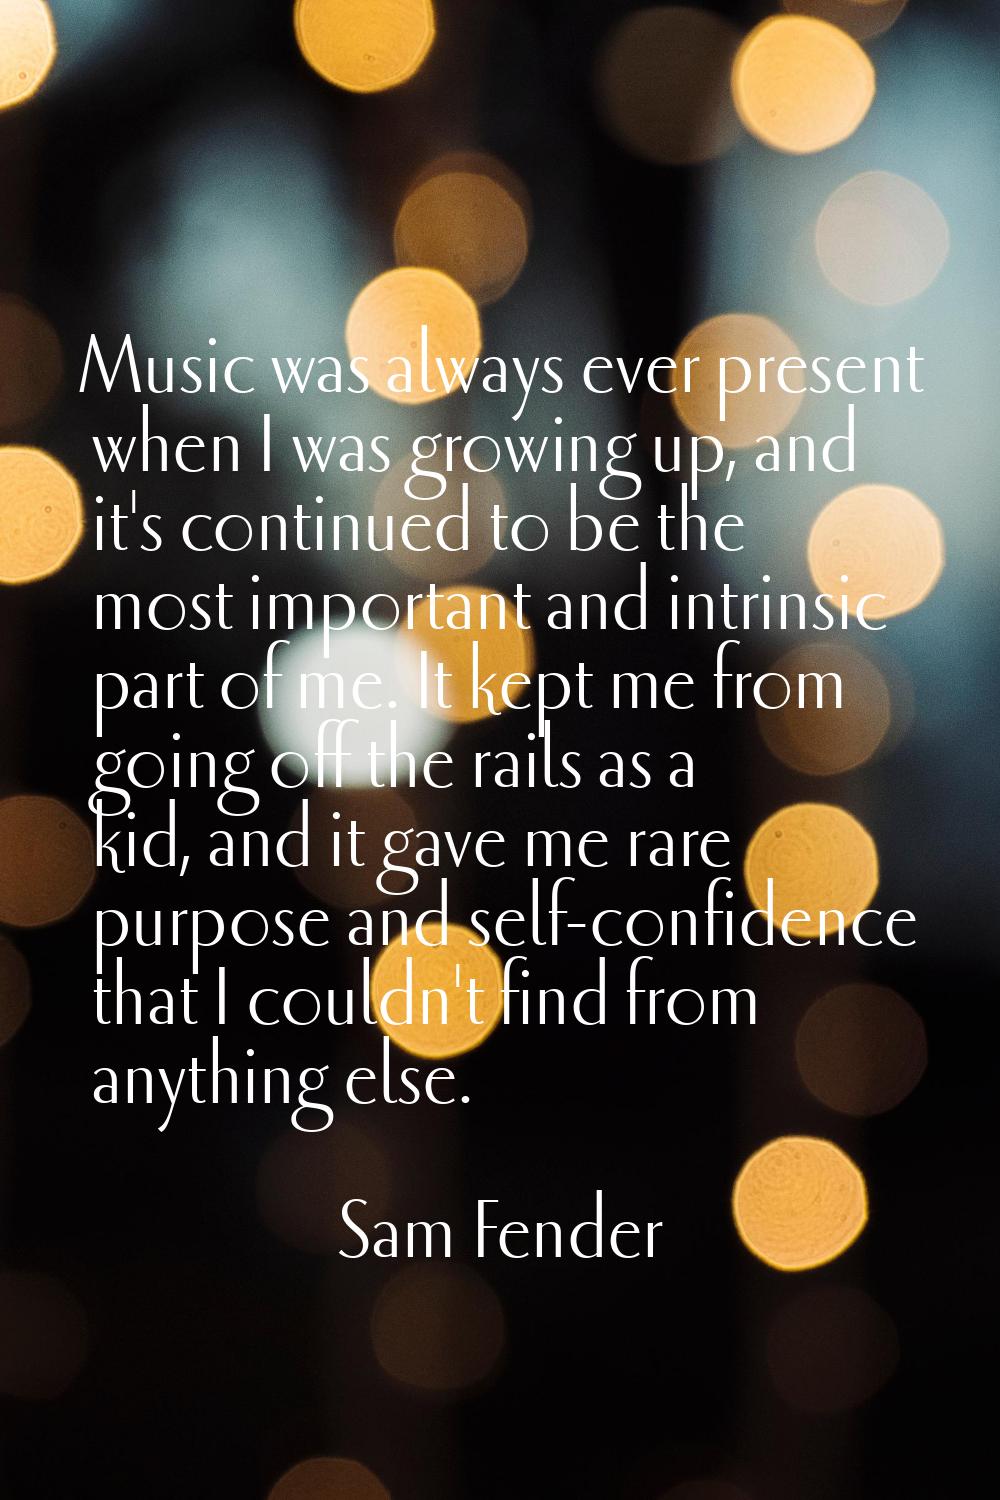 Music was always ever present when I was growing up, and it's continued to be the most important an